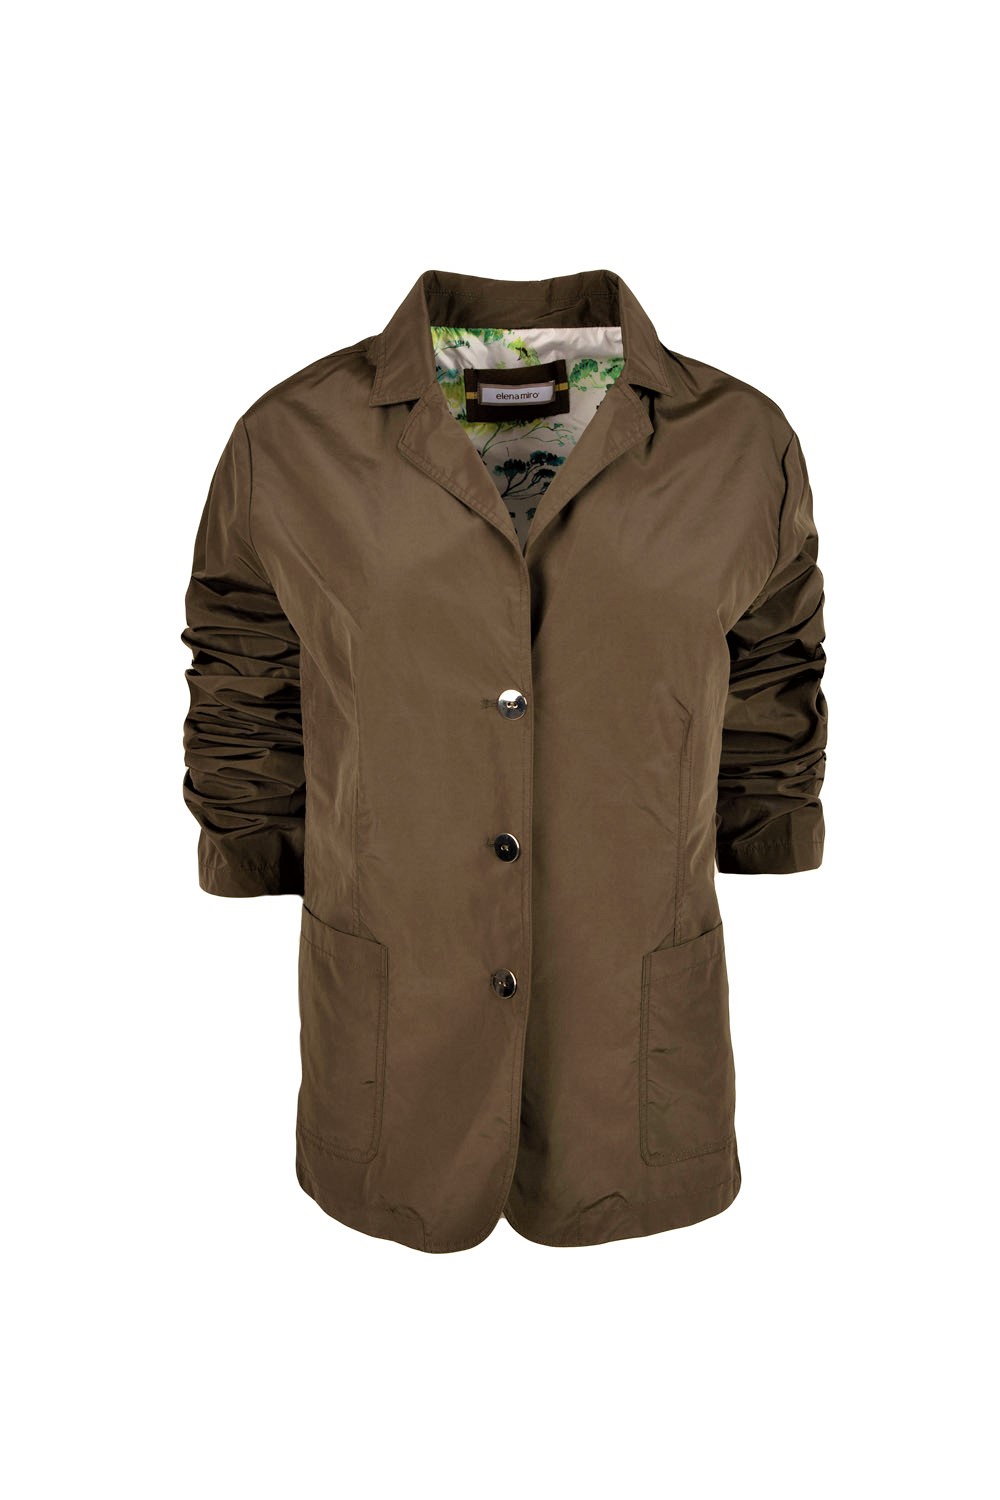 Utility Style Jacket with Seam Ruching Detail